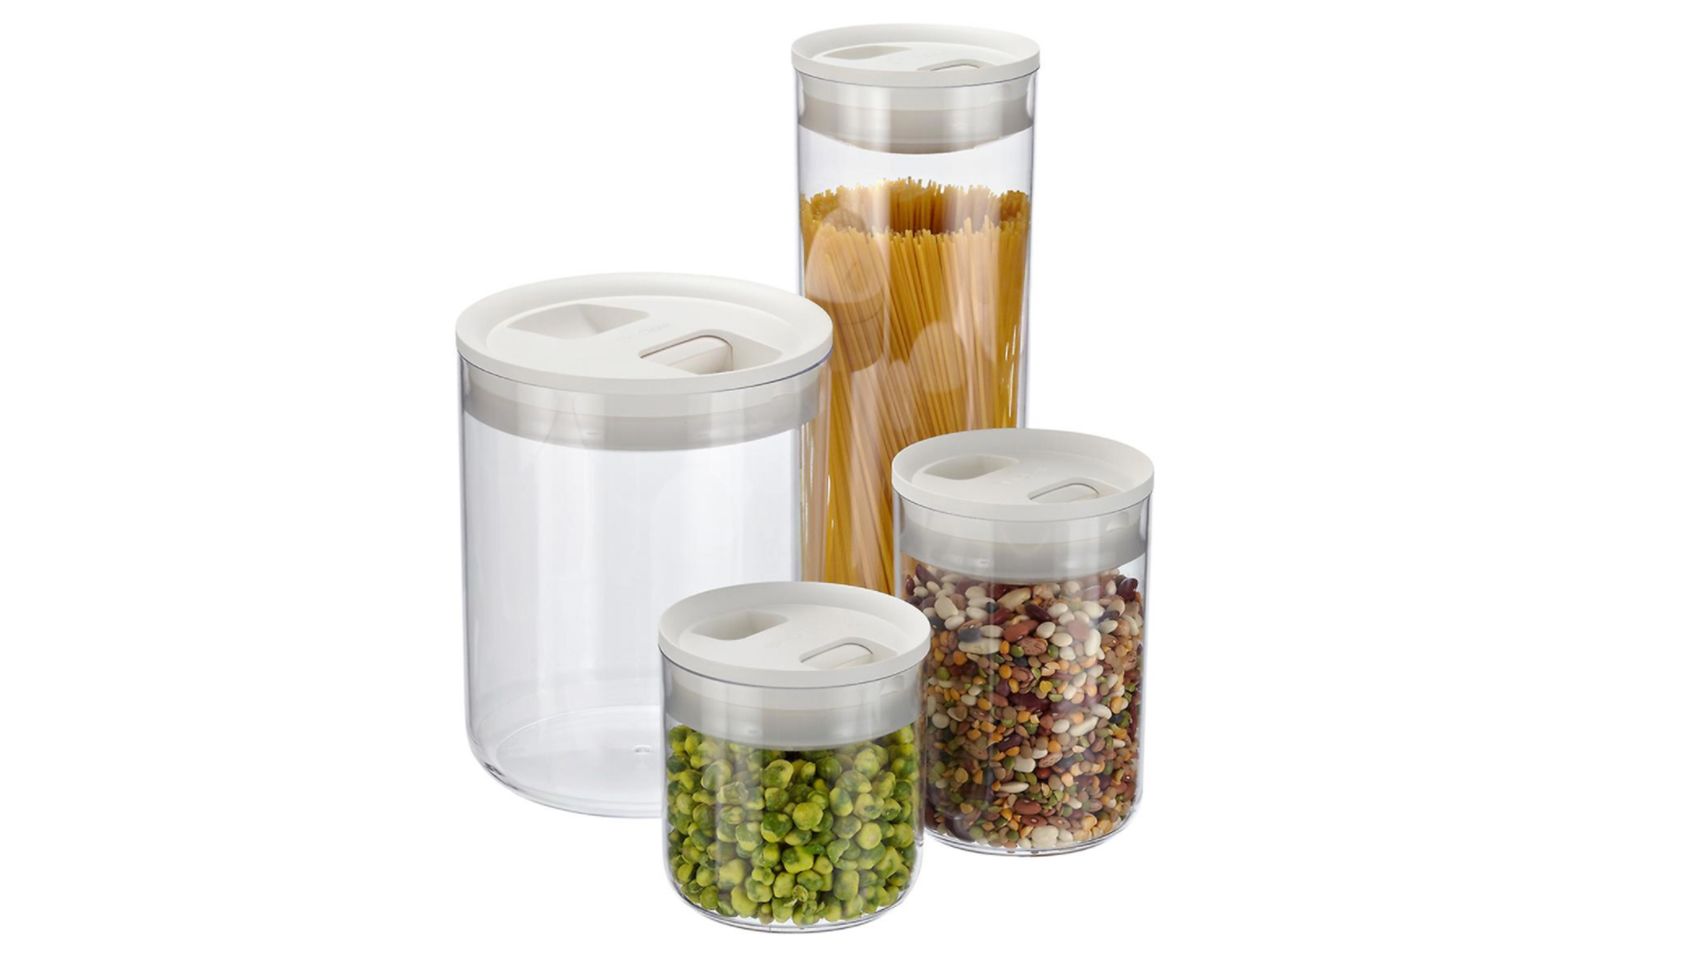 https://media.cnn.com/api/v1/images/stellar/prod/210806092909-kitchen-the-container-store-click-clack-pantry-canisters.jpg?q=w_1700,h_957,x_0,y_0,c_fill